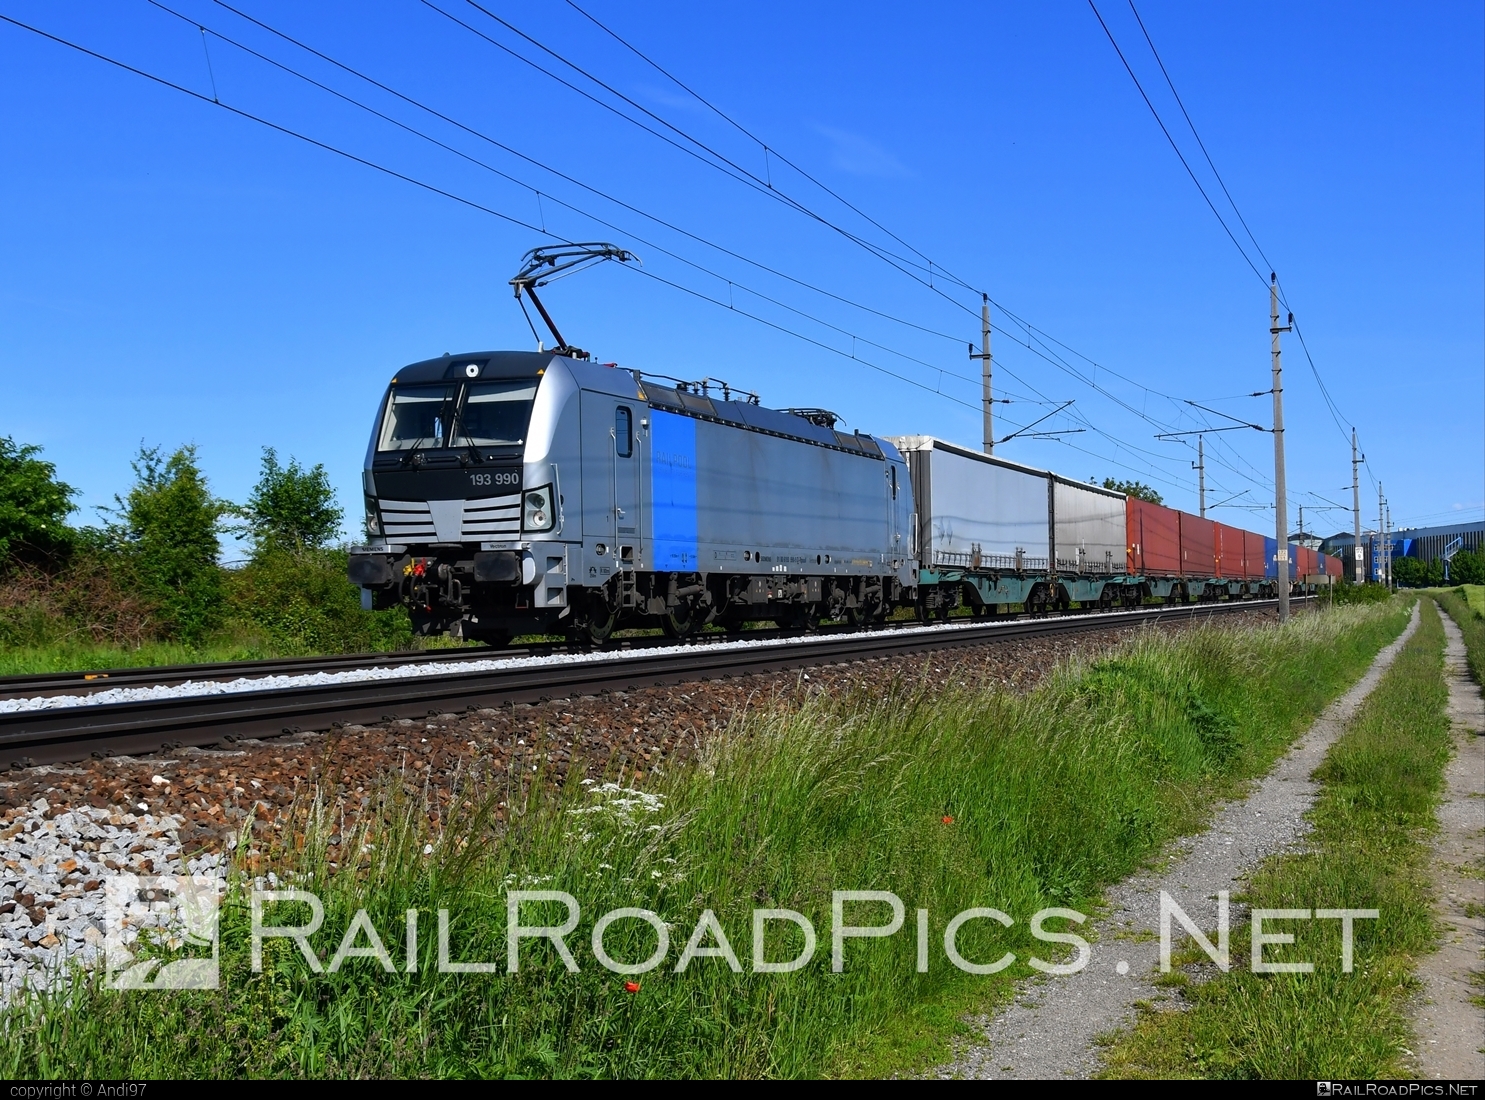 Siemens Vectron AC - 193 990 operated by ecco-rail GmbH #eccorail #eccorailgmbh #flatwagon #railpool #railpoolgmbh #semitrailer #siemens #siemensVectron #siemensVectronAC #vectron #vectronAC